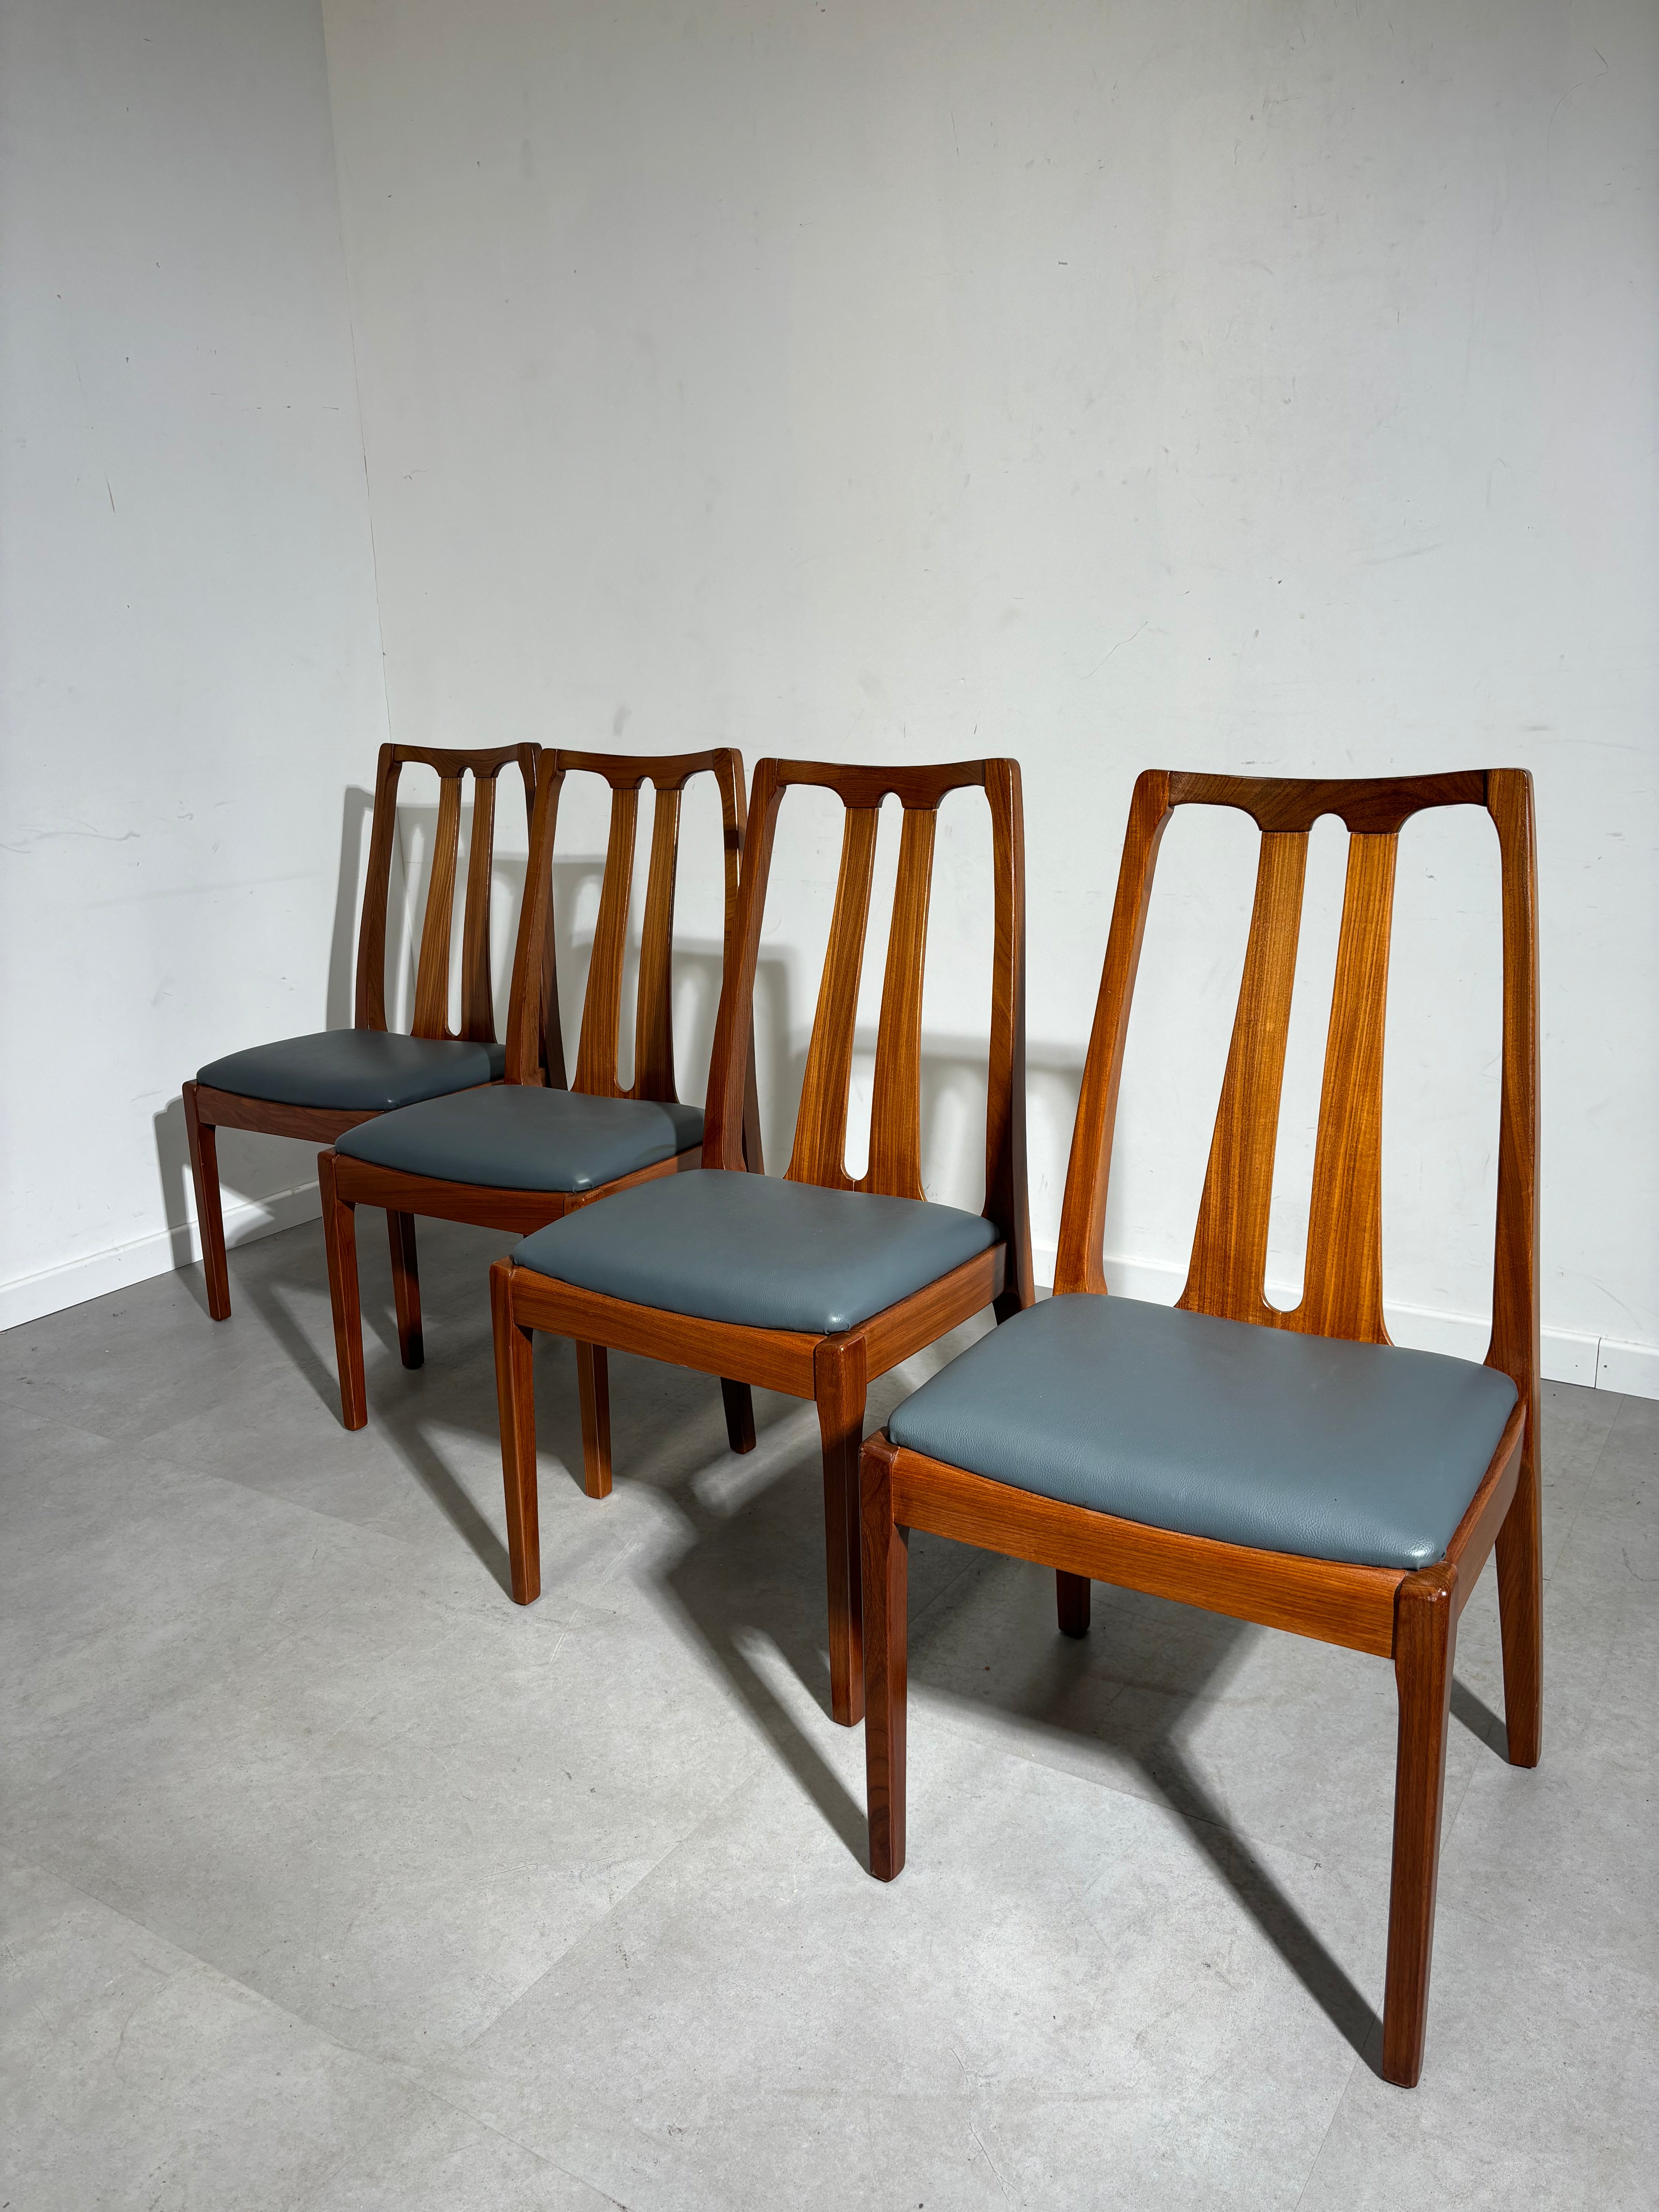 Set of four “Nathan” Dining chairs